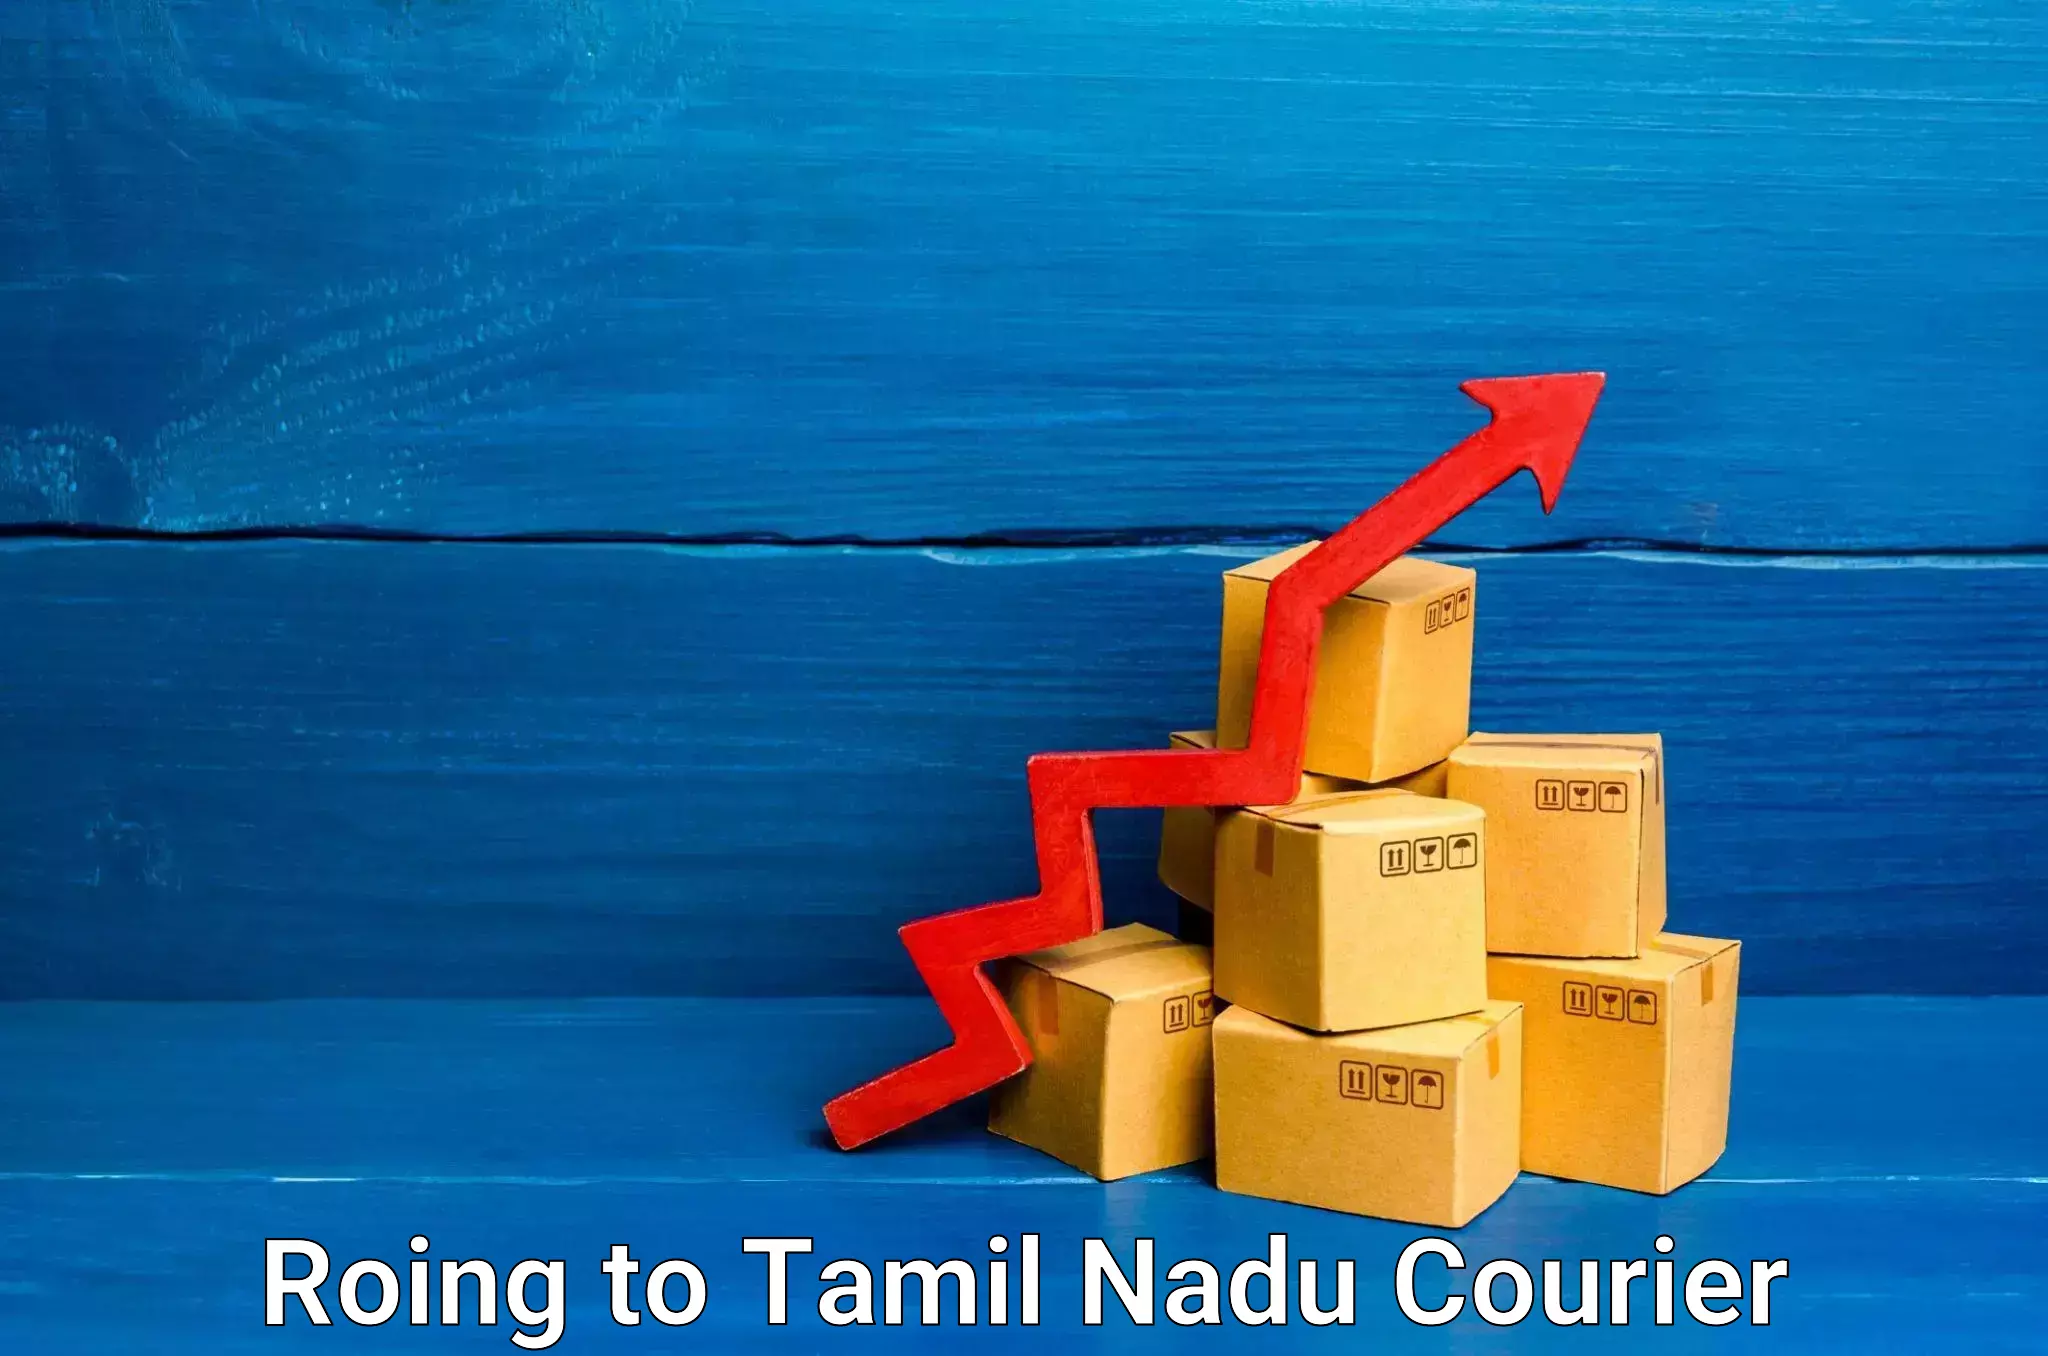 On-call courier service Roing to Tamil Nadu